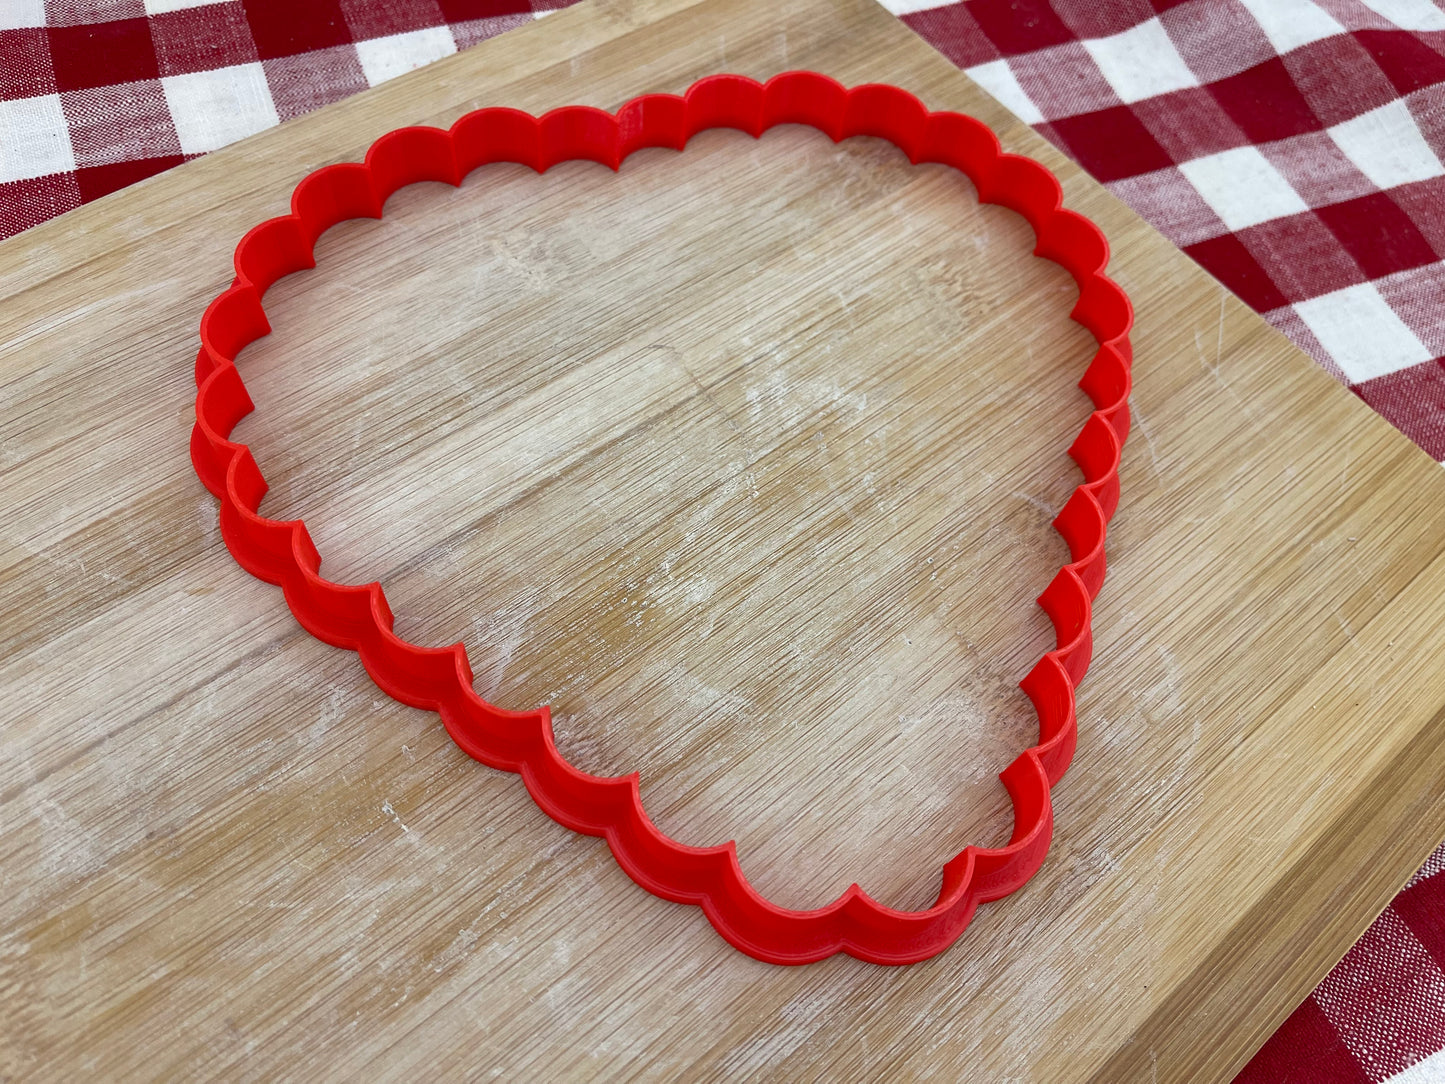 Scallop Edge Heart Clay Cutter, made to match GR Pottery form - plastic 3D printed, pottery tool, multiple sizes